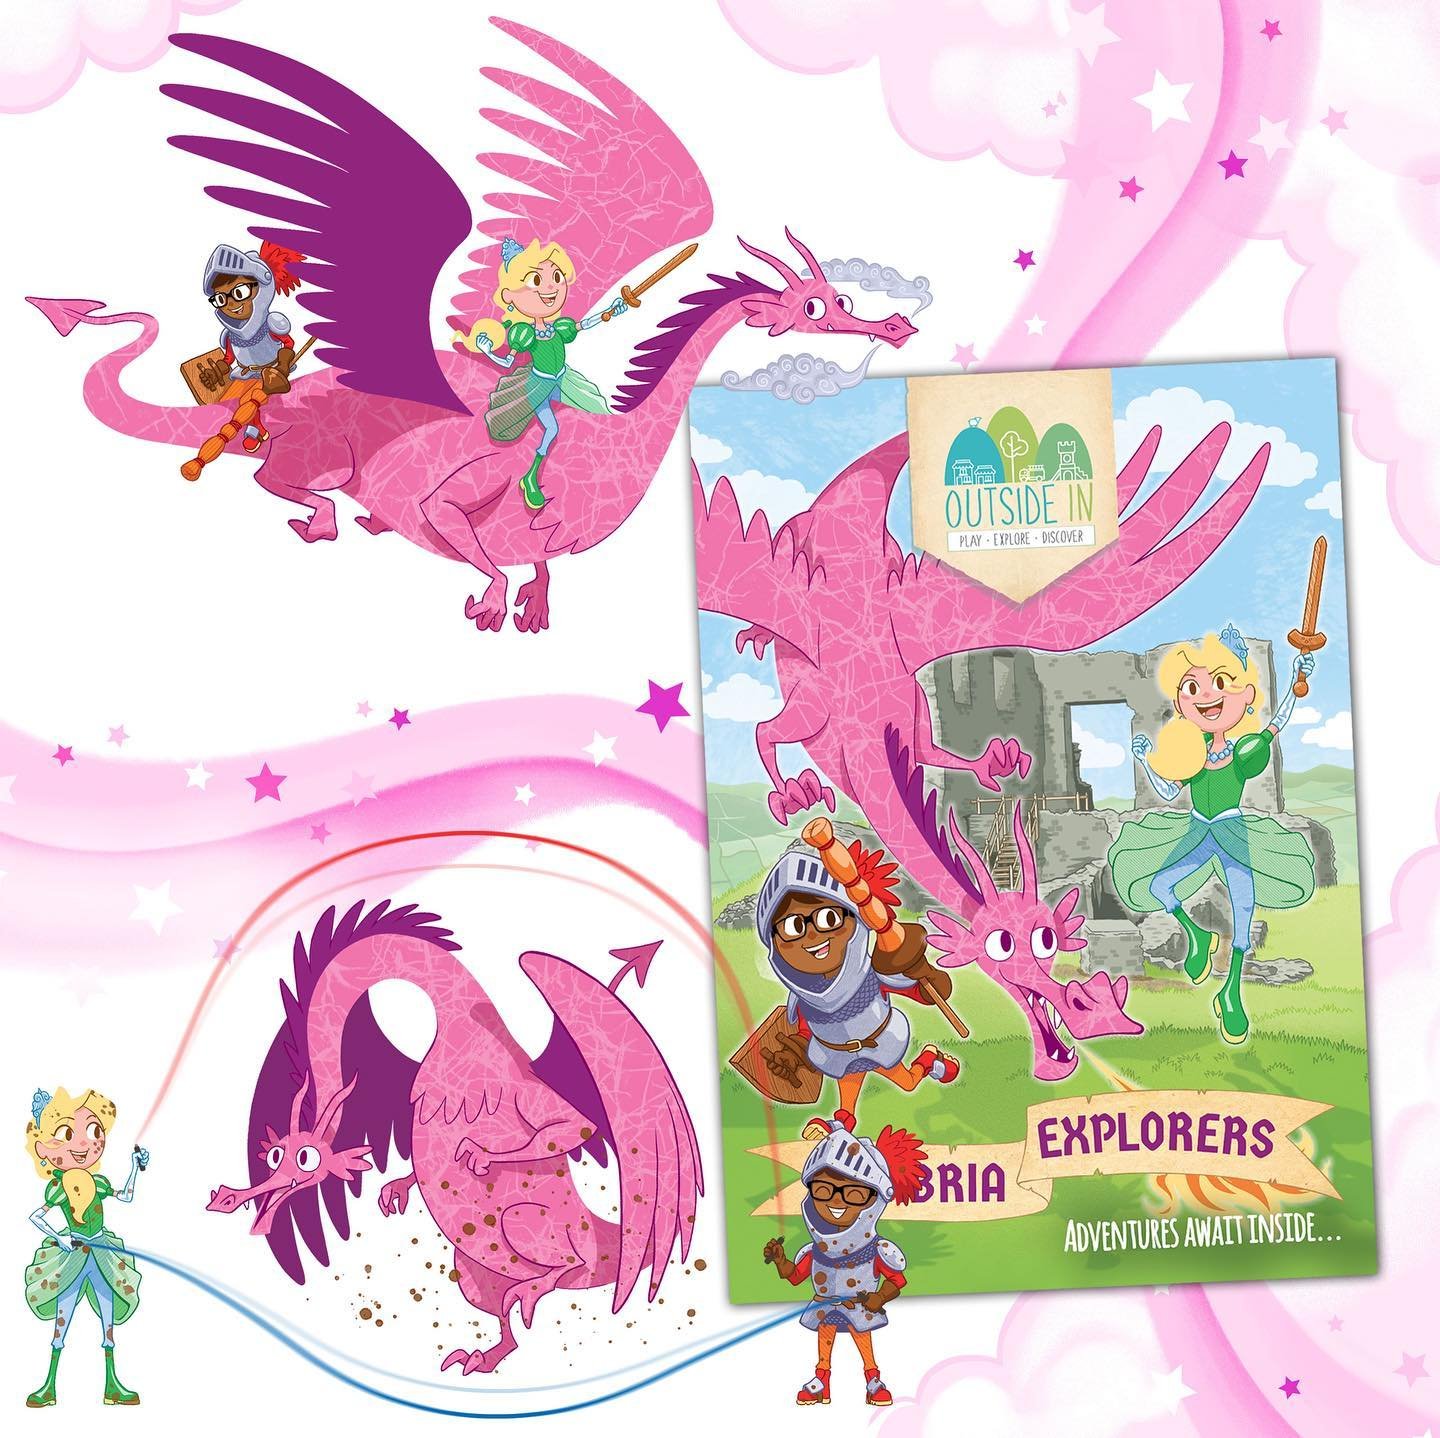 We loved creating this children&rsquo;s activity book for @outsideincumbria filled with fun &amp; engaging activities brought to life with hand illustrations and a cheeky dragon!

The book takes you on an adventure as Princess Kate, Sir Paul &amp; Sm